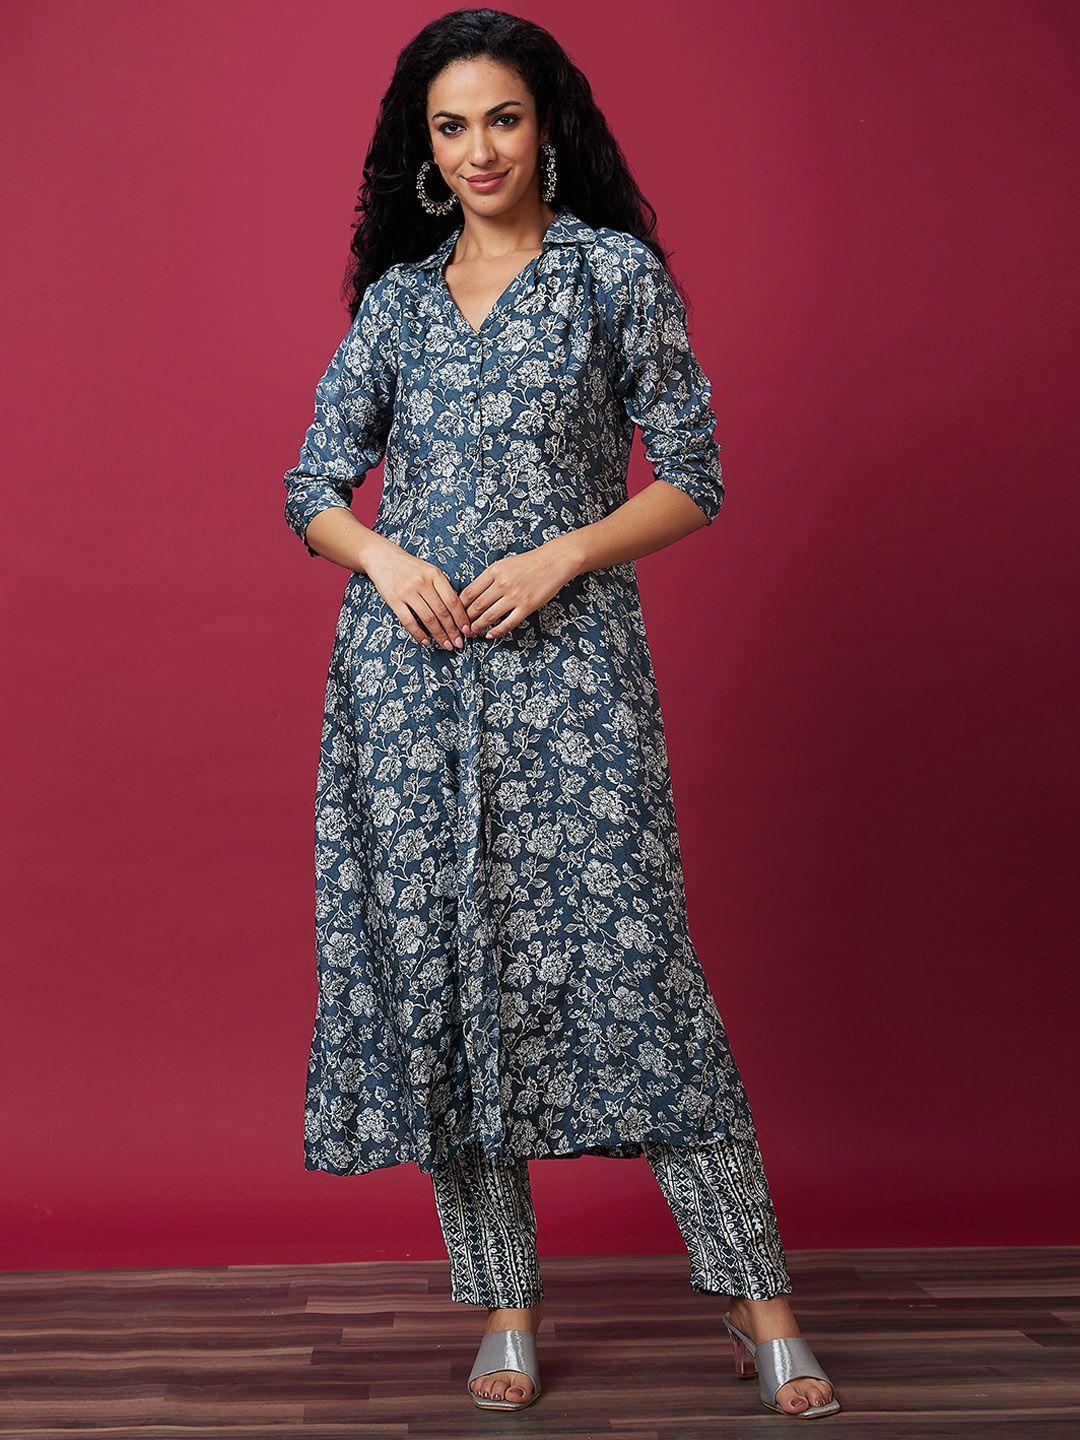 globus-blue-&-white-floral-printed-high-slit-kurta-with-trousers